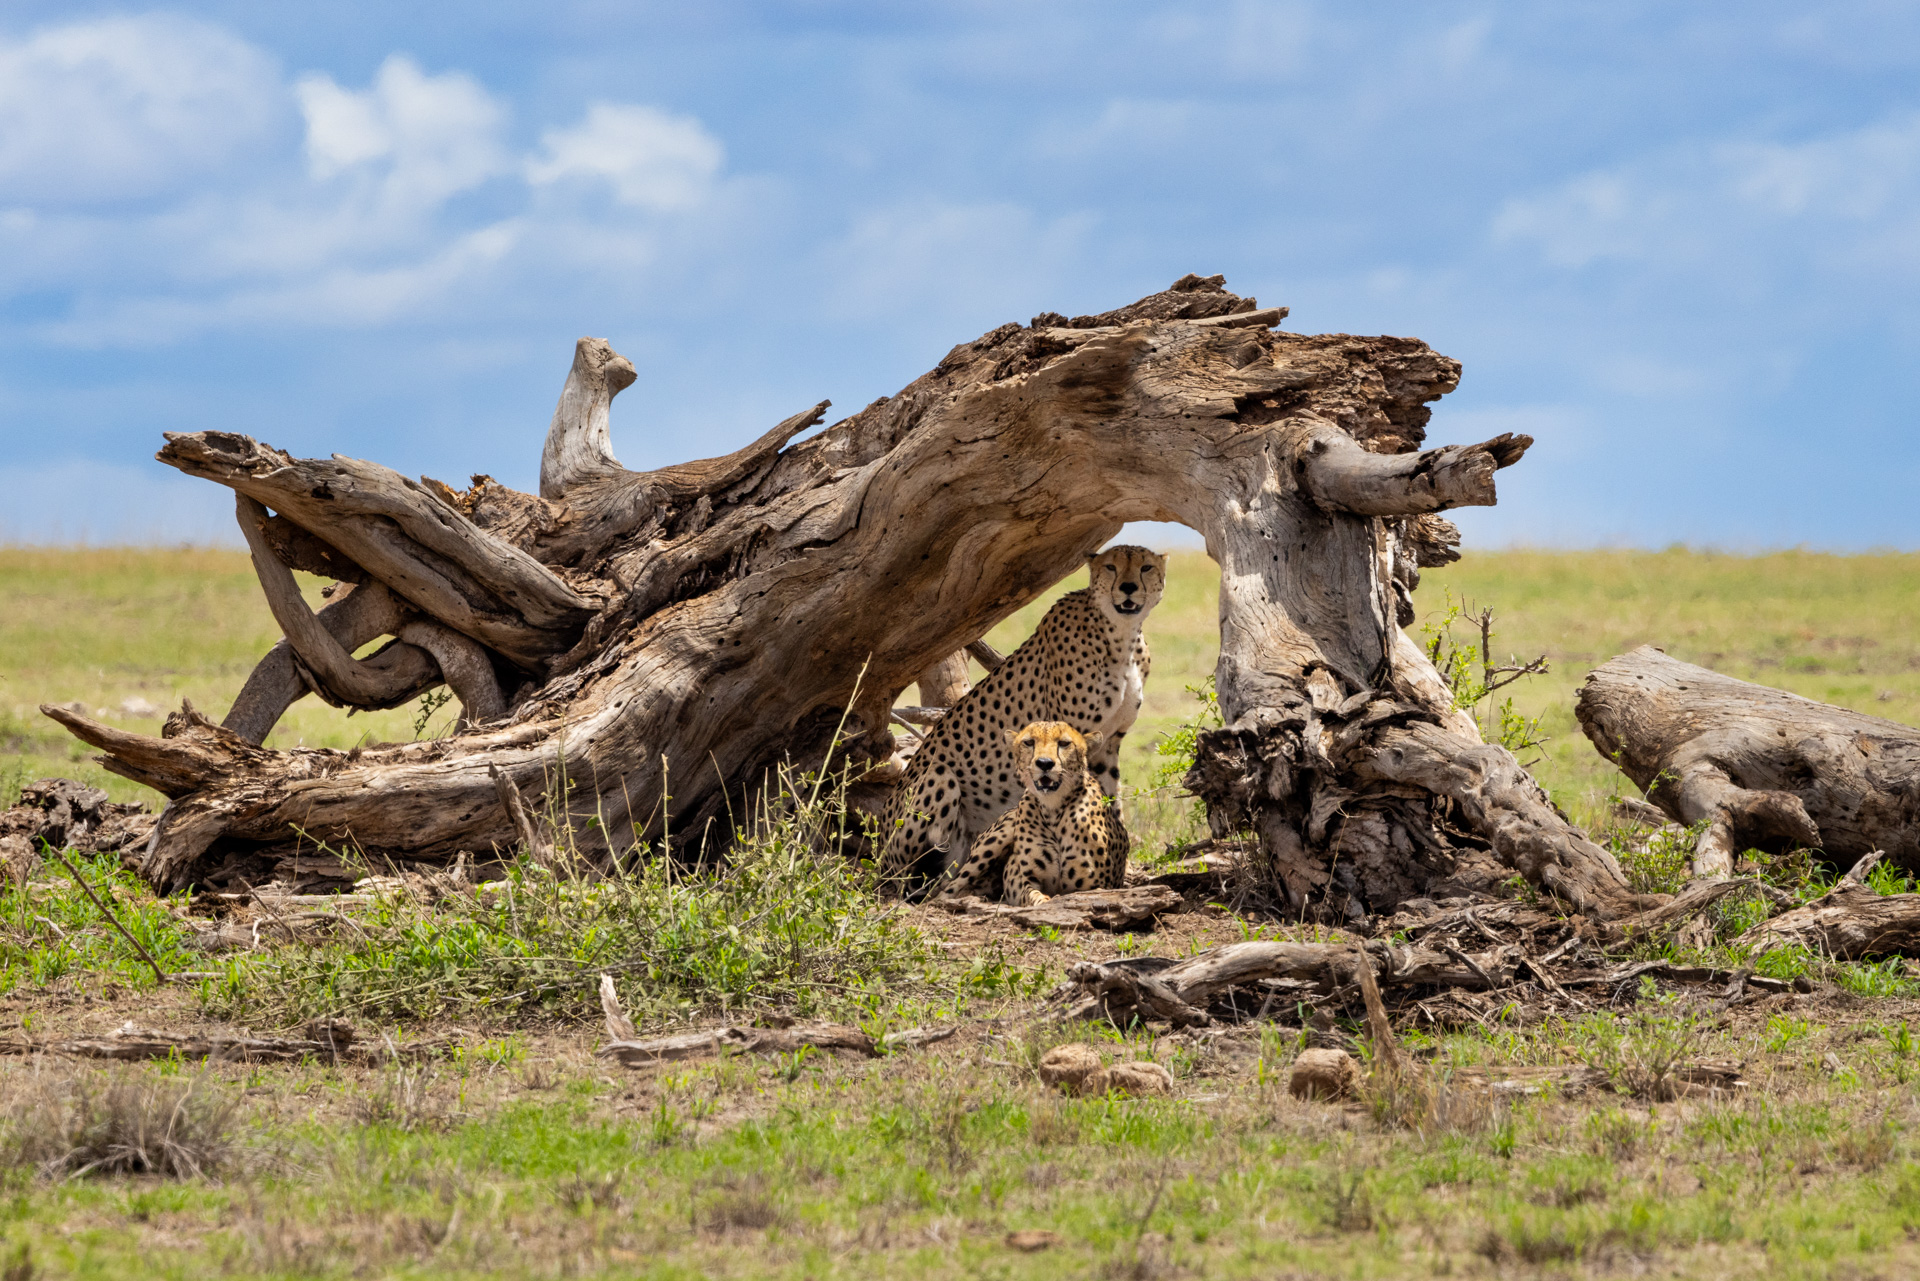 Above: Cheetahs in Amboseli National Park take cover from the heat 